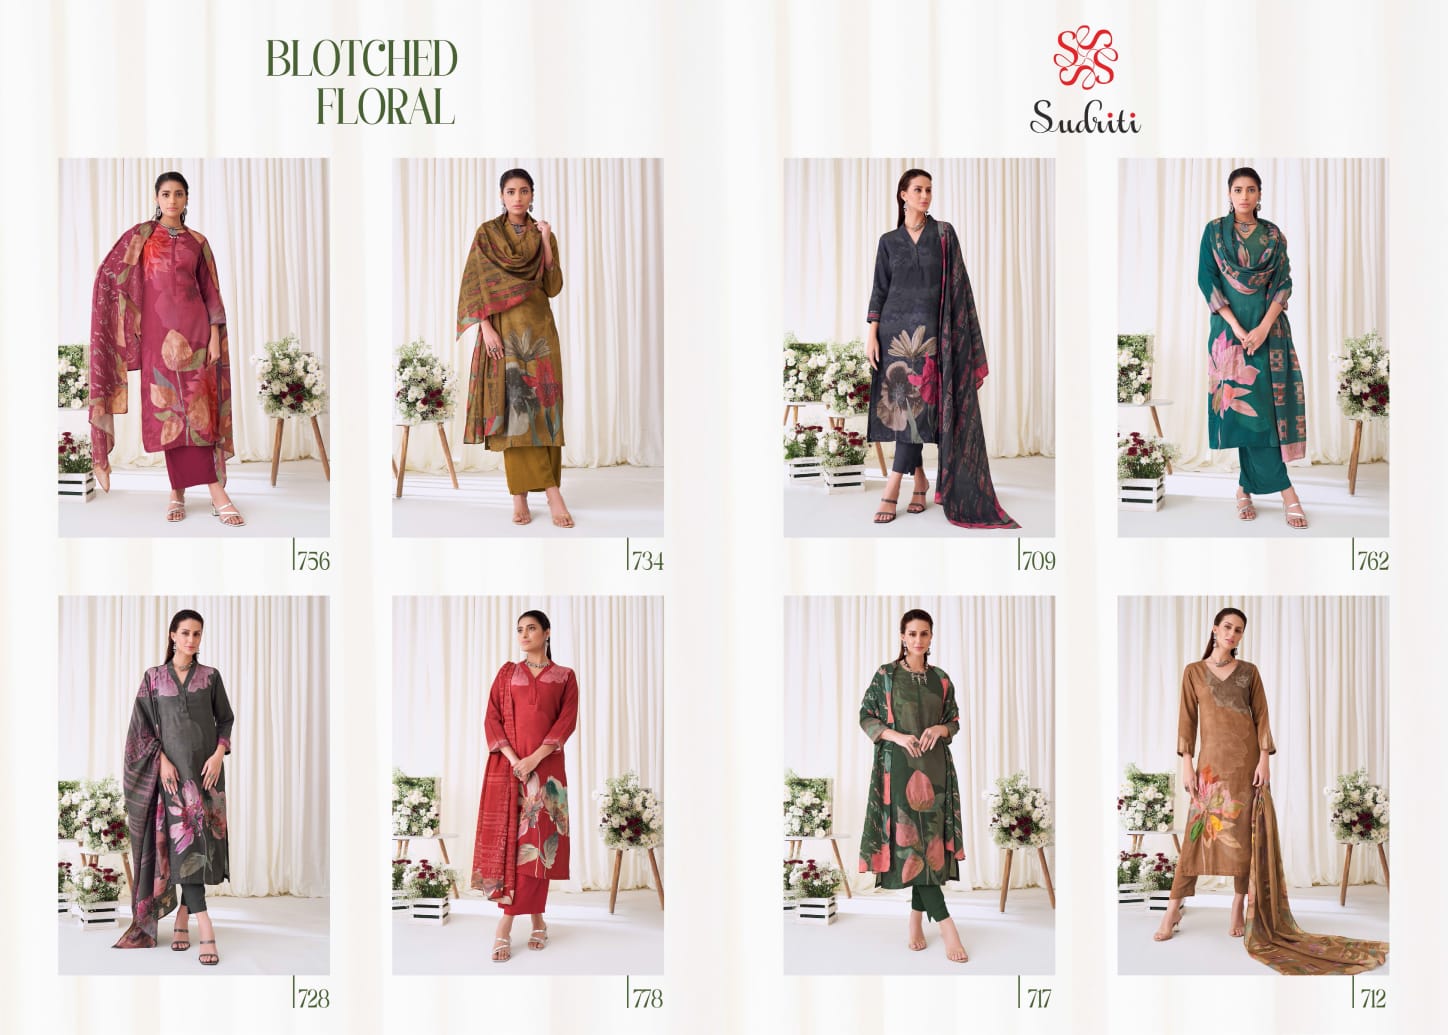 Sudriti Blotched Floral collection 13